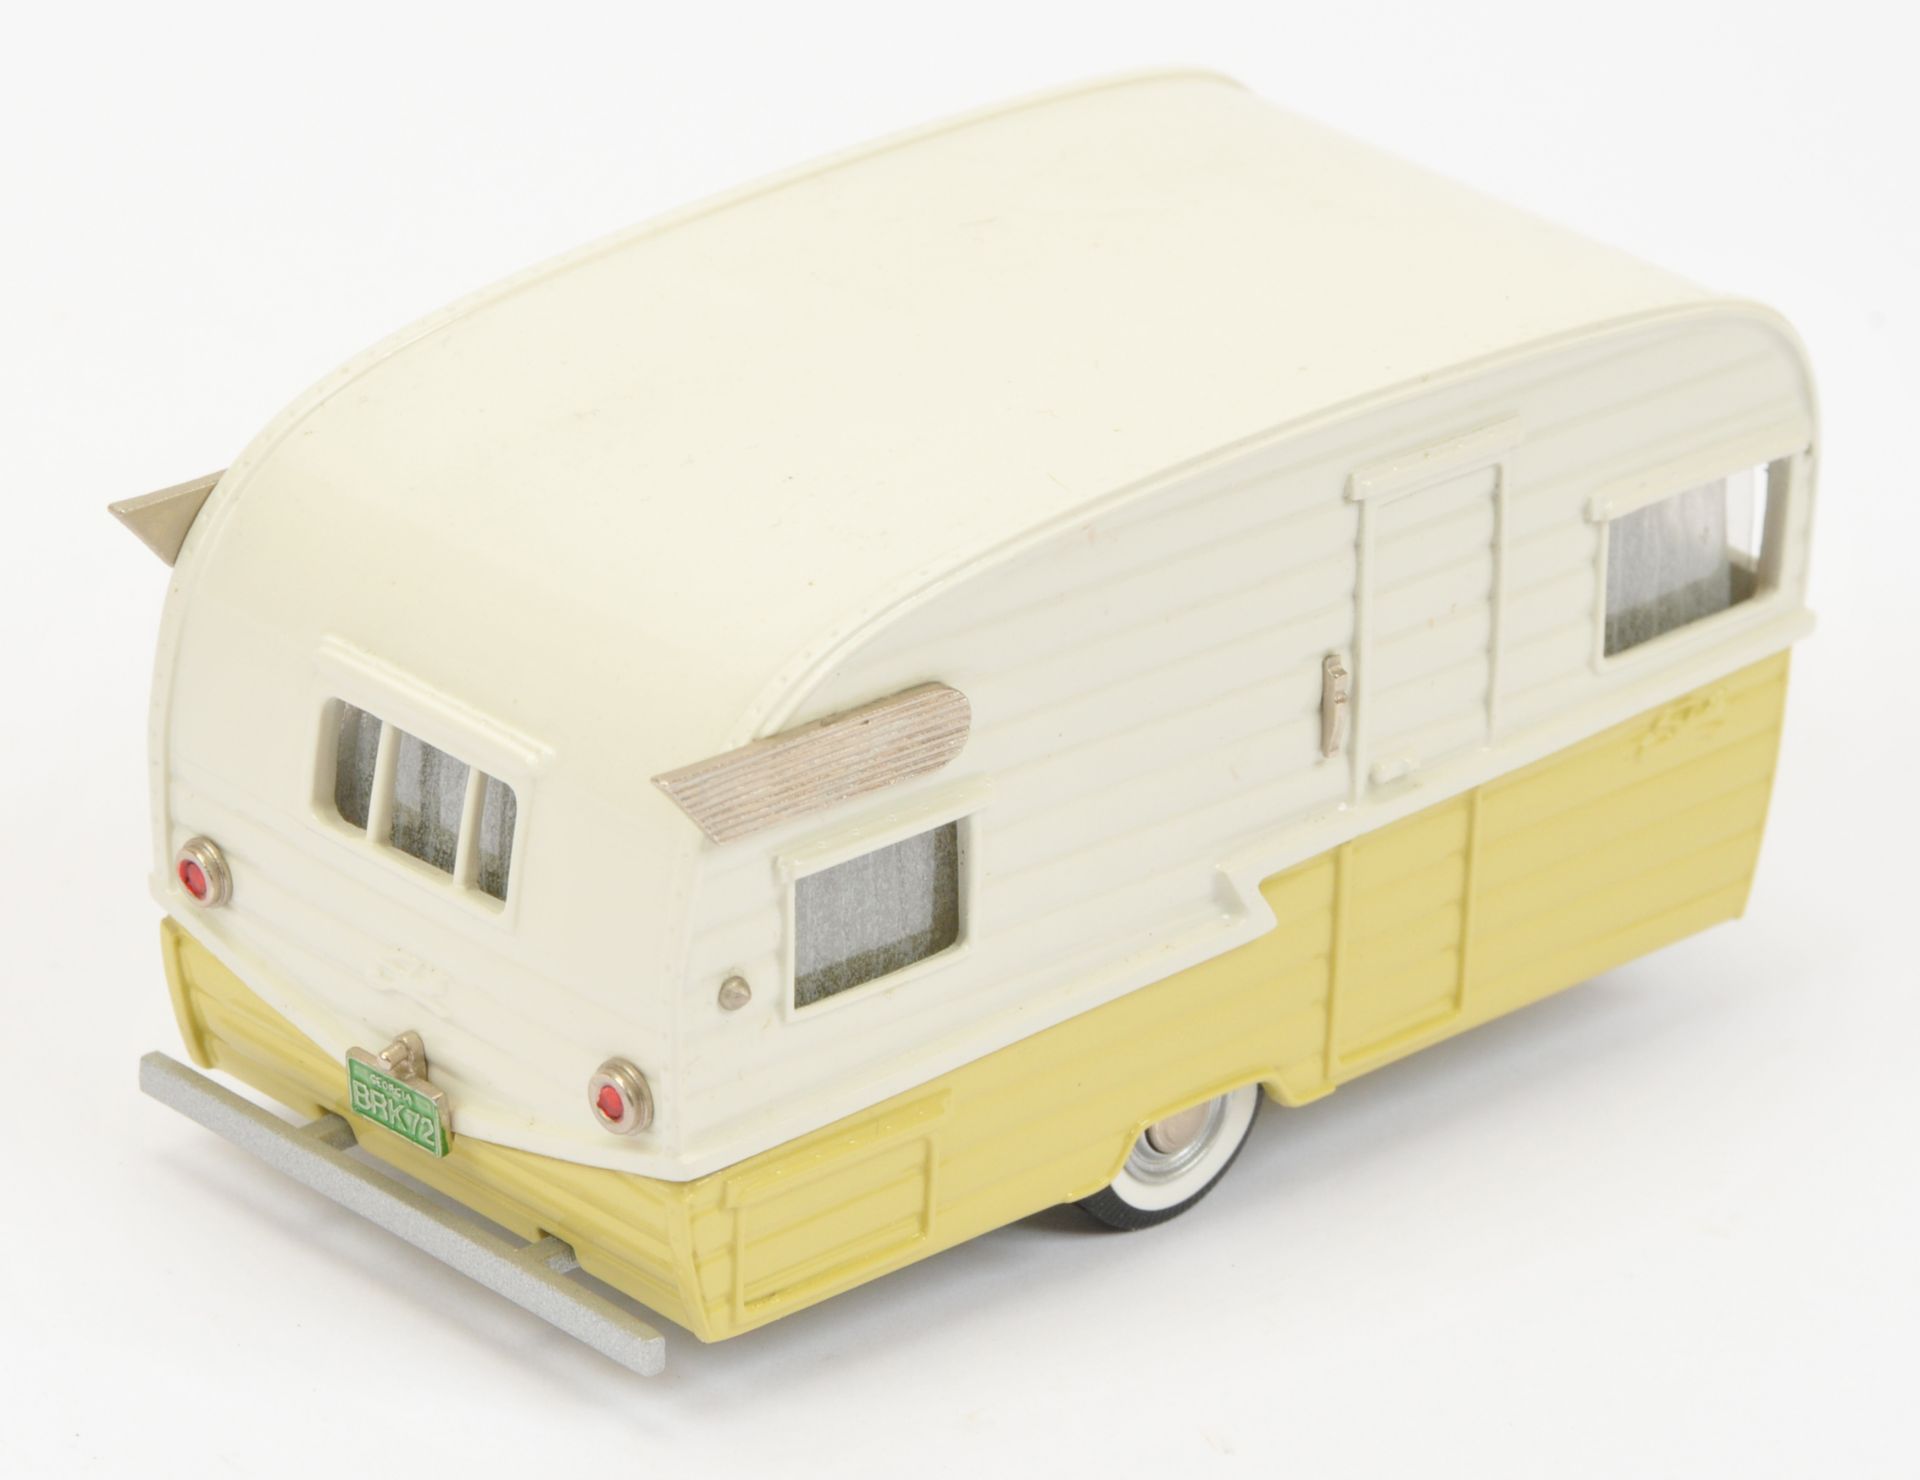 Brooklin Models a boxed BRK 72 1958 Shasta Airflyte Travel Trailer - Image 2 of 2